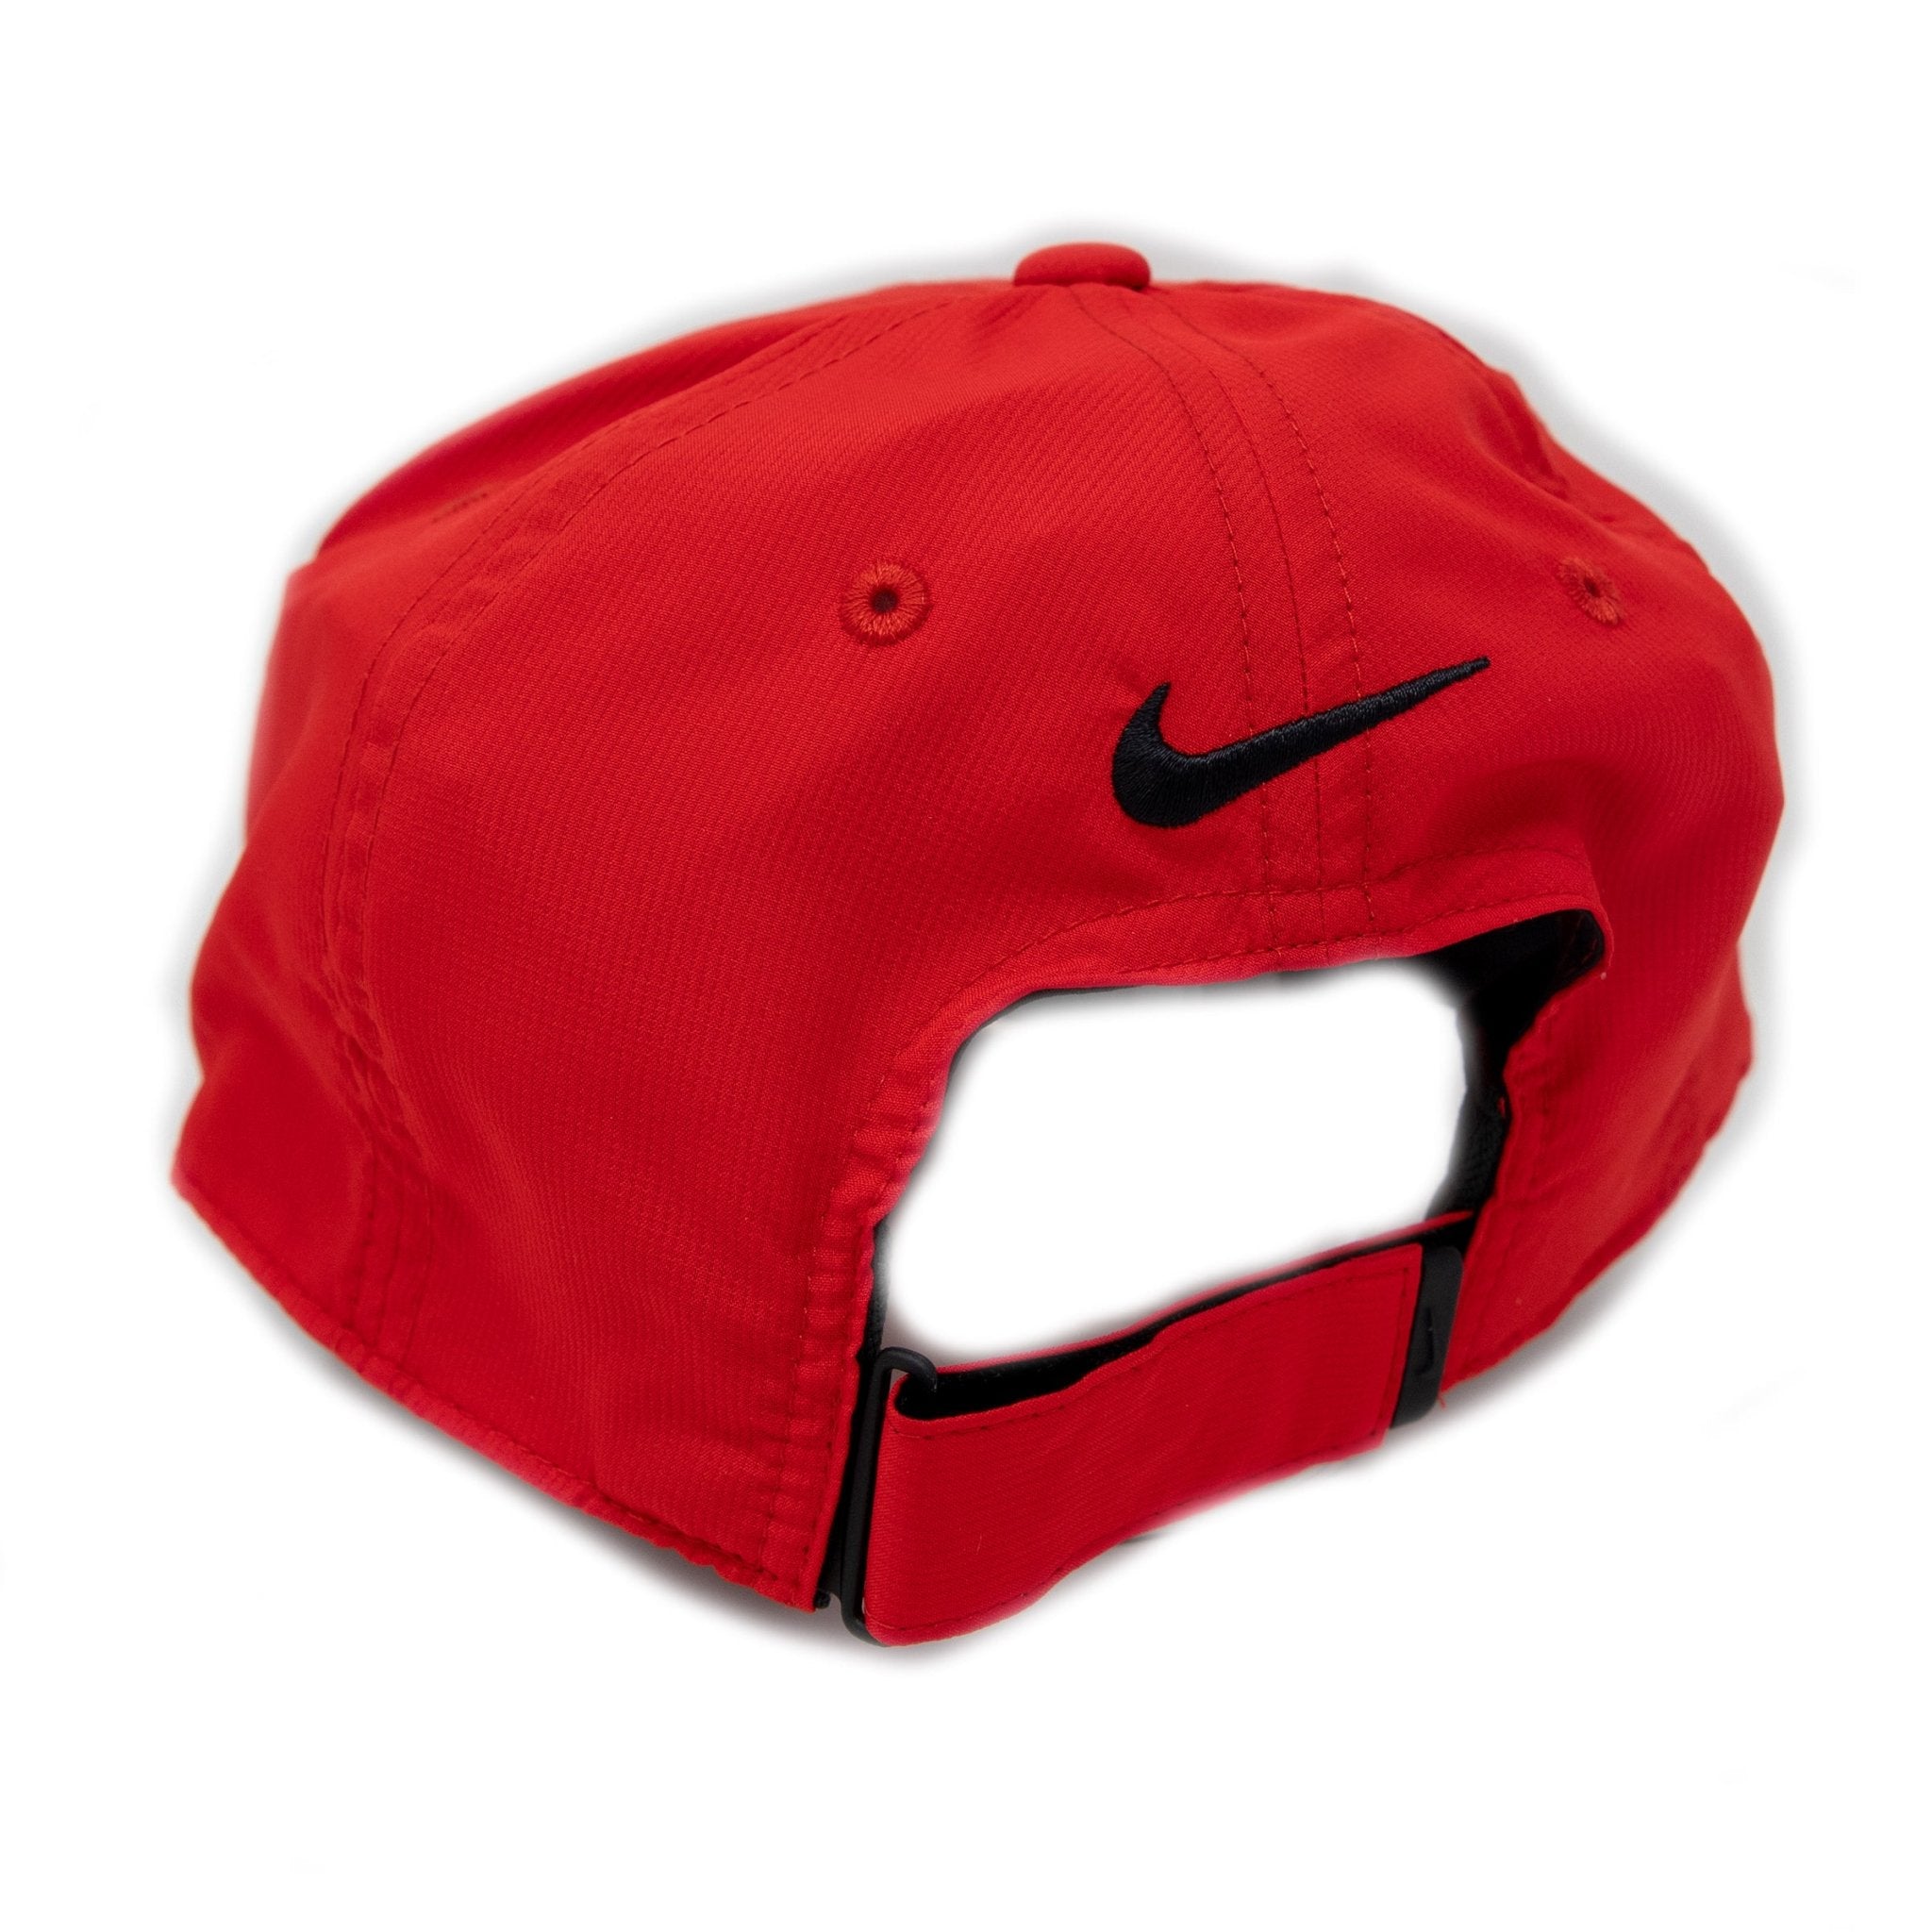 Nike Cathedral City Cap - Red - Destination PSP